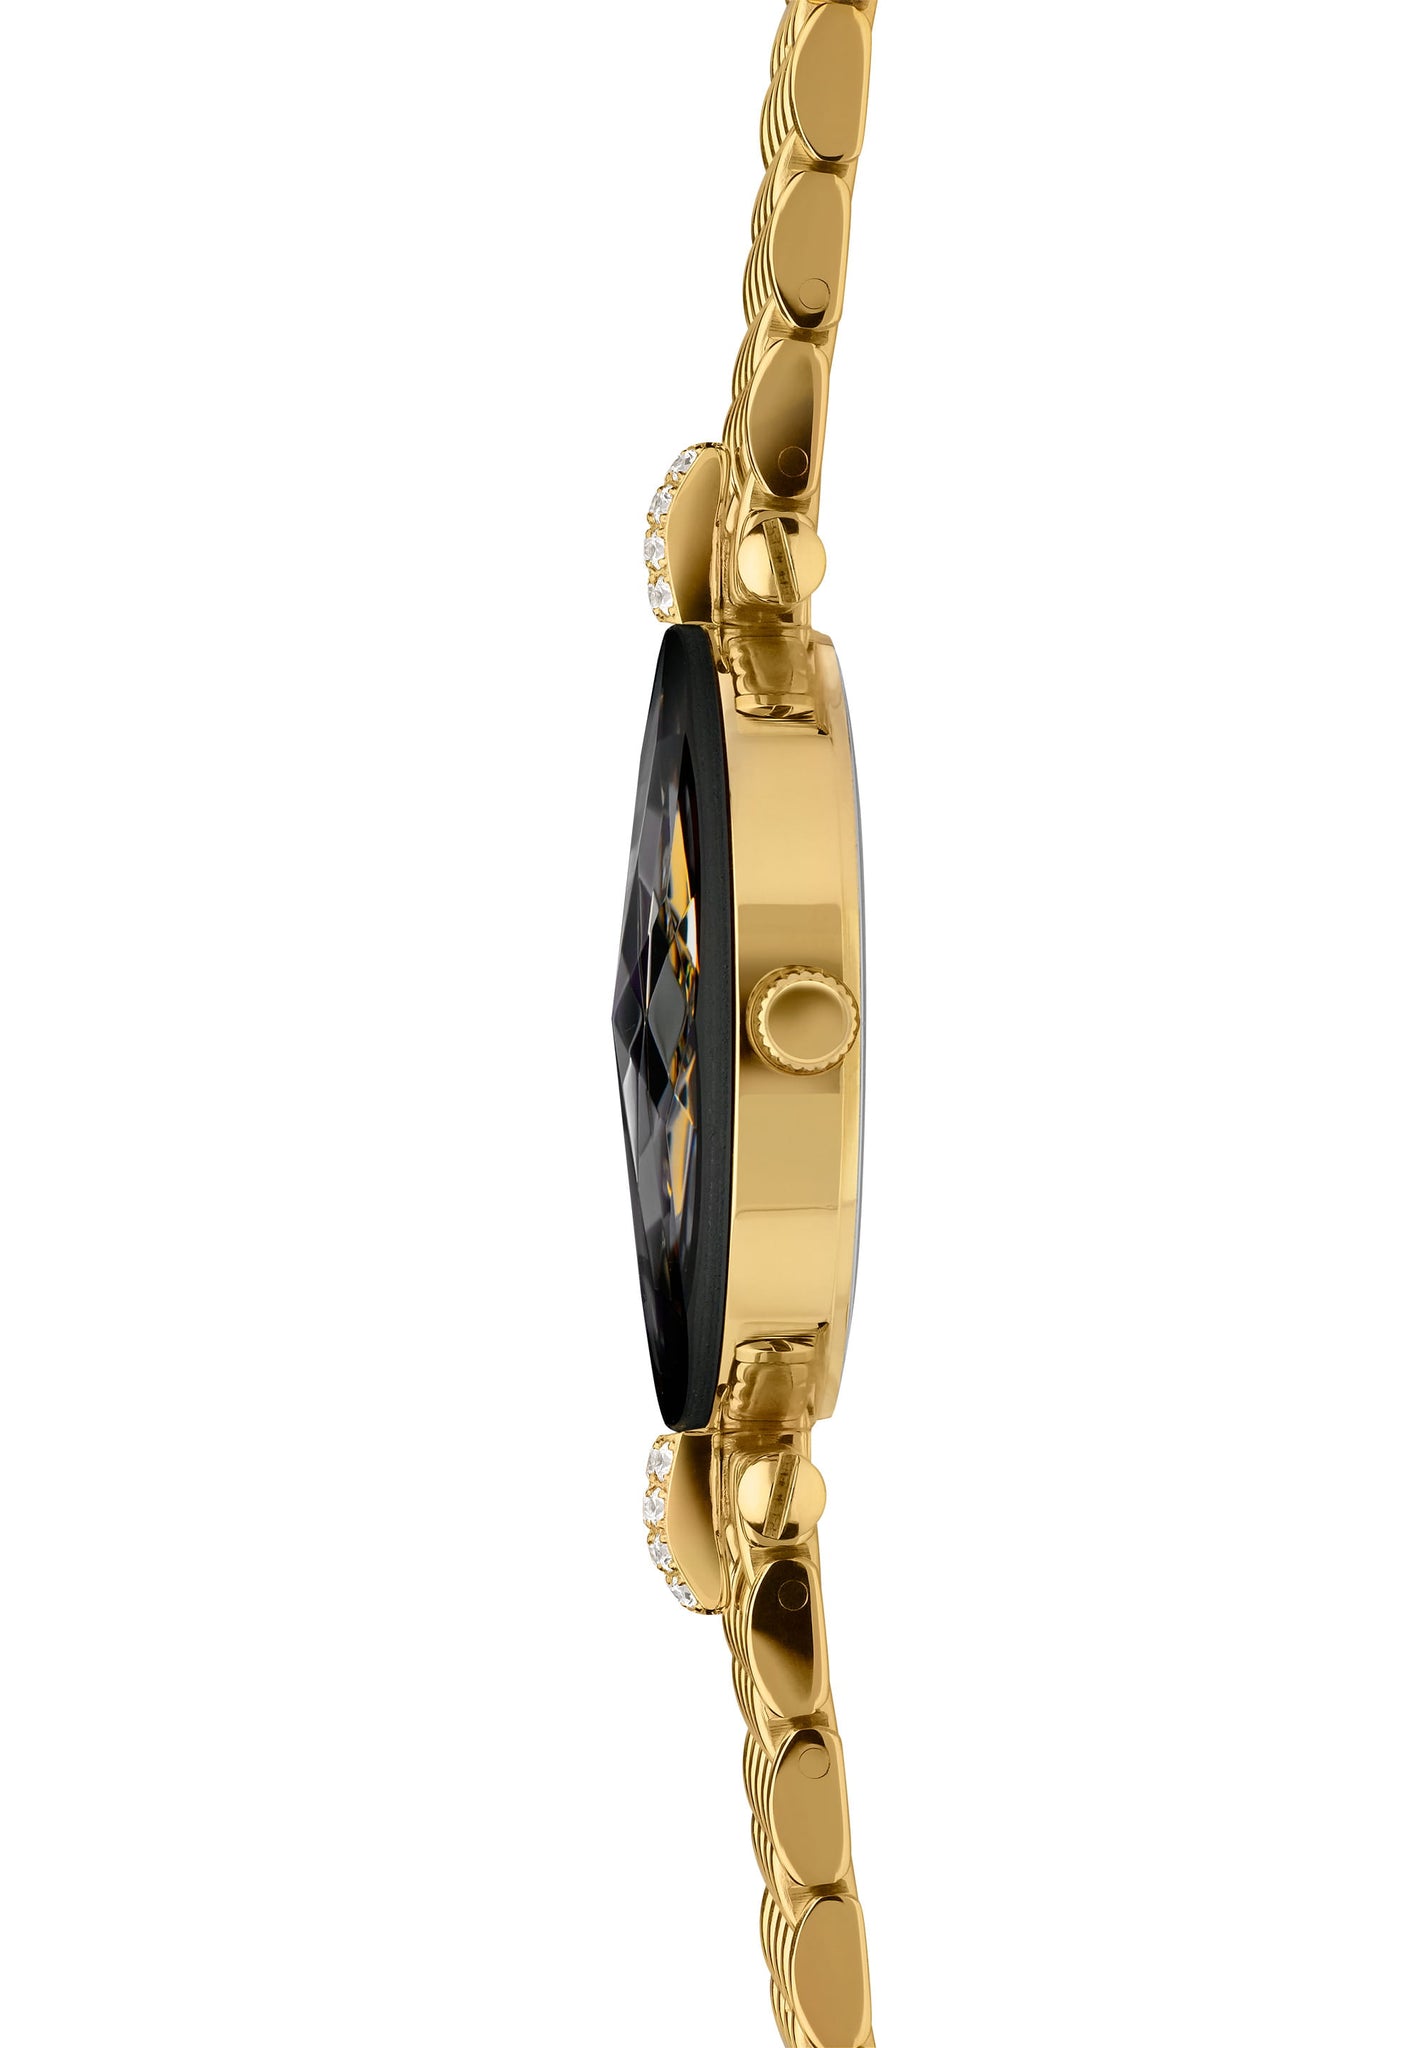 Facet Strass Reloj Mujer Suizo J5.630.M